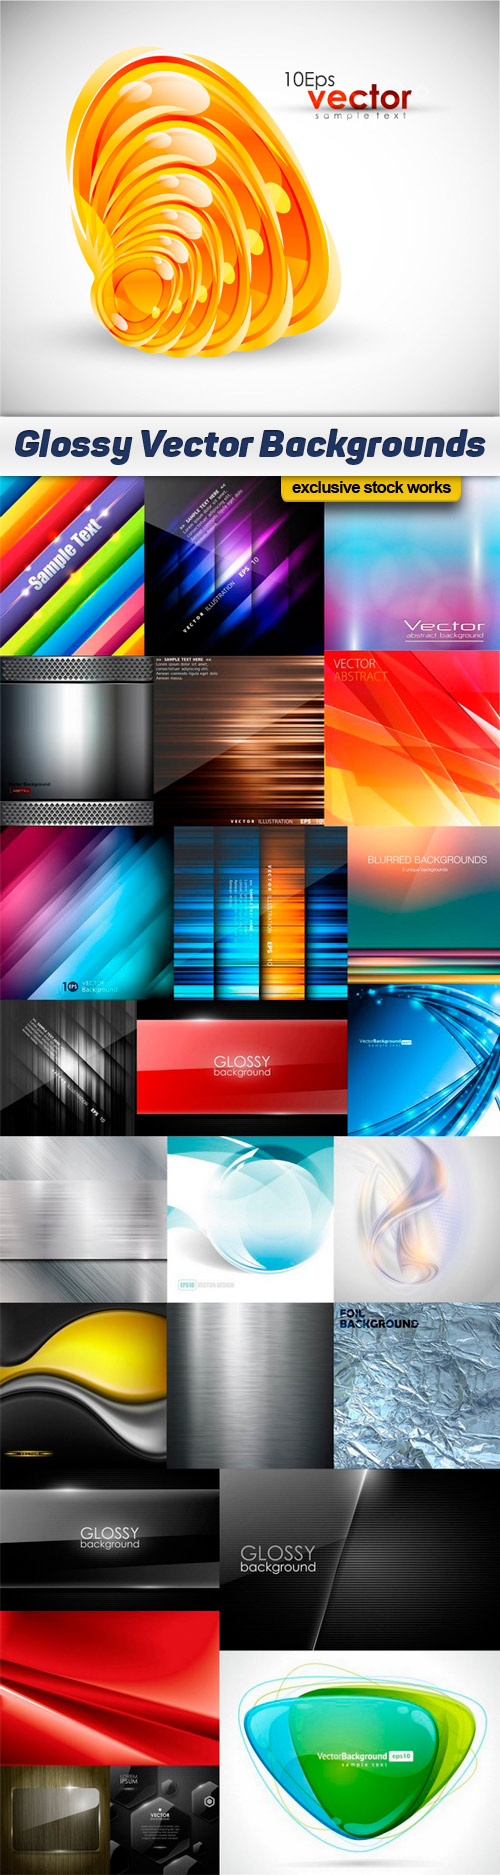 Glossy Vector Backgrounds 6